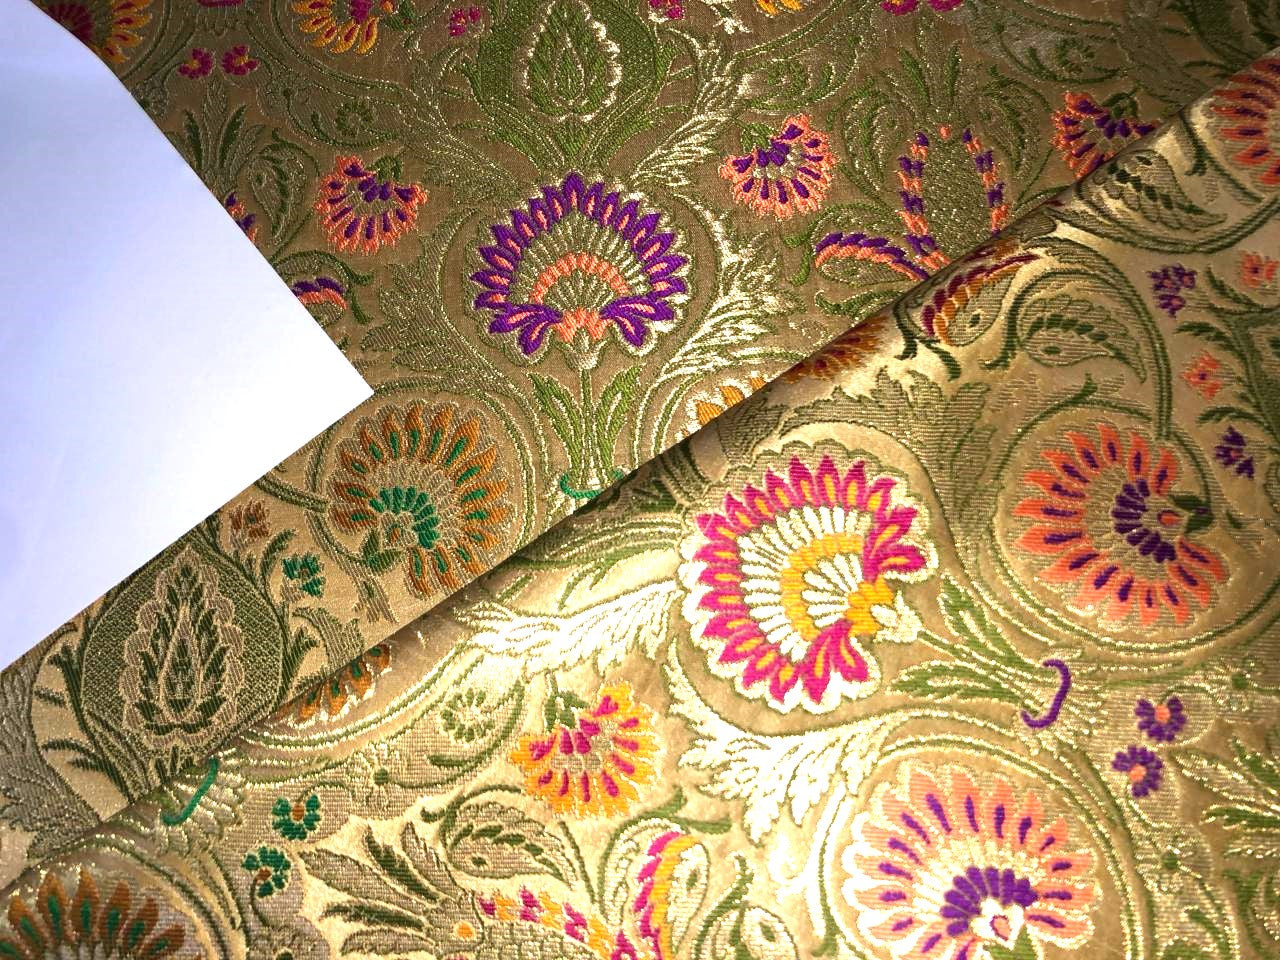 Silk Brocade King Khab fabric 36" wide available in 6 colors [PINK/ GOLD/ NAVY/ MANGO YELLOW / RED /BLACK] BRO920